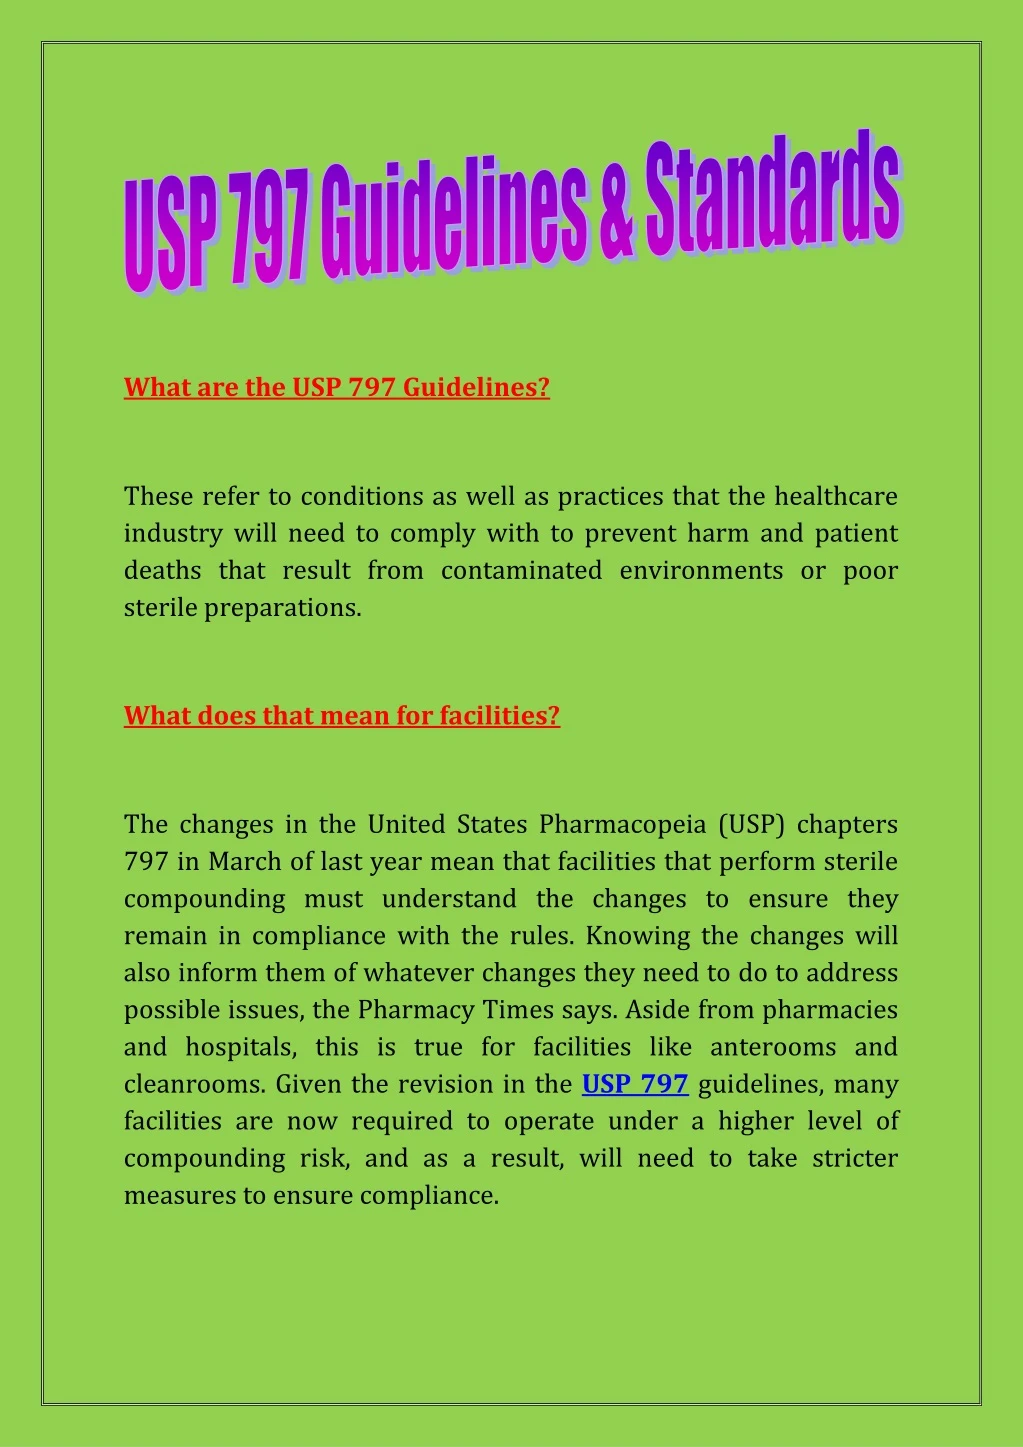 what are the usp 797 guidelines